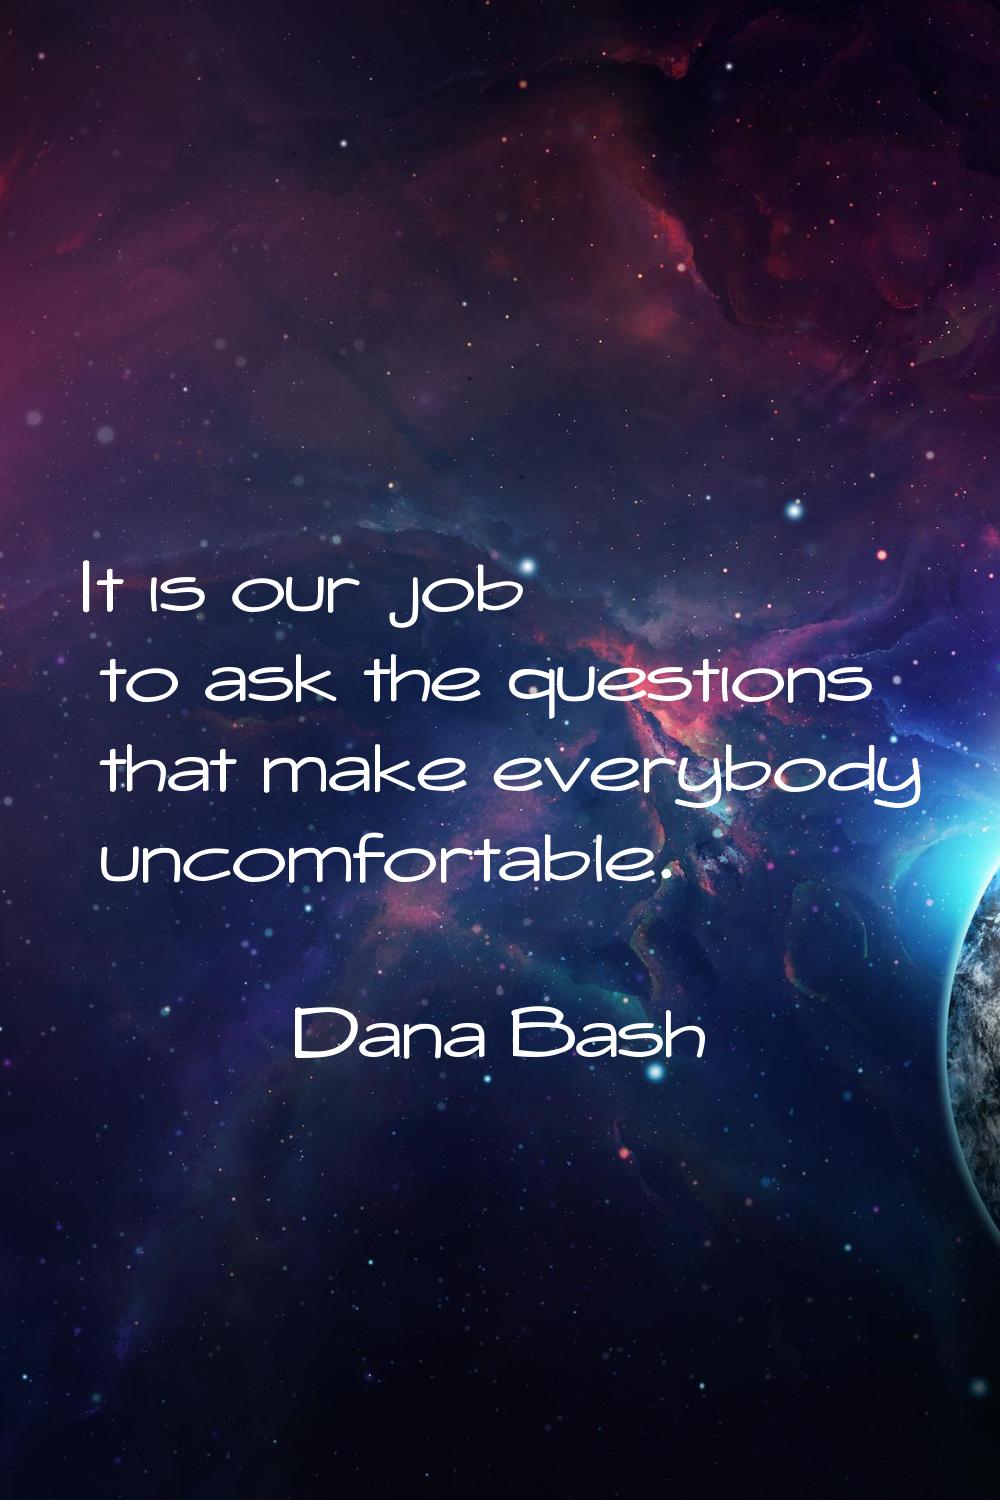 It is our job to ask the questions that make everybody uncomfortable.